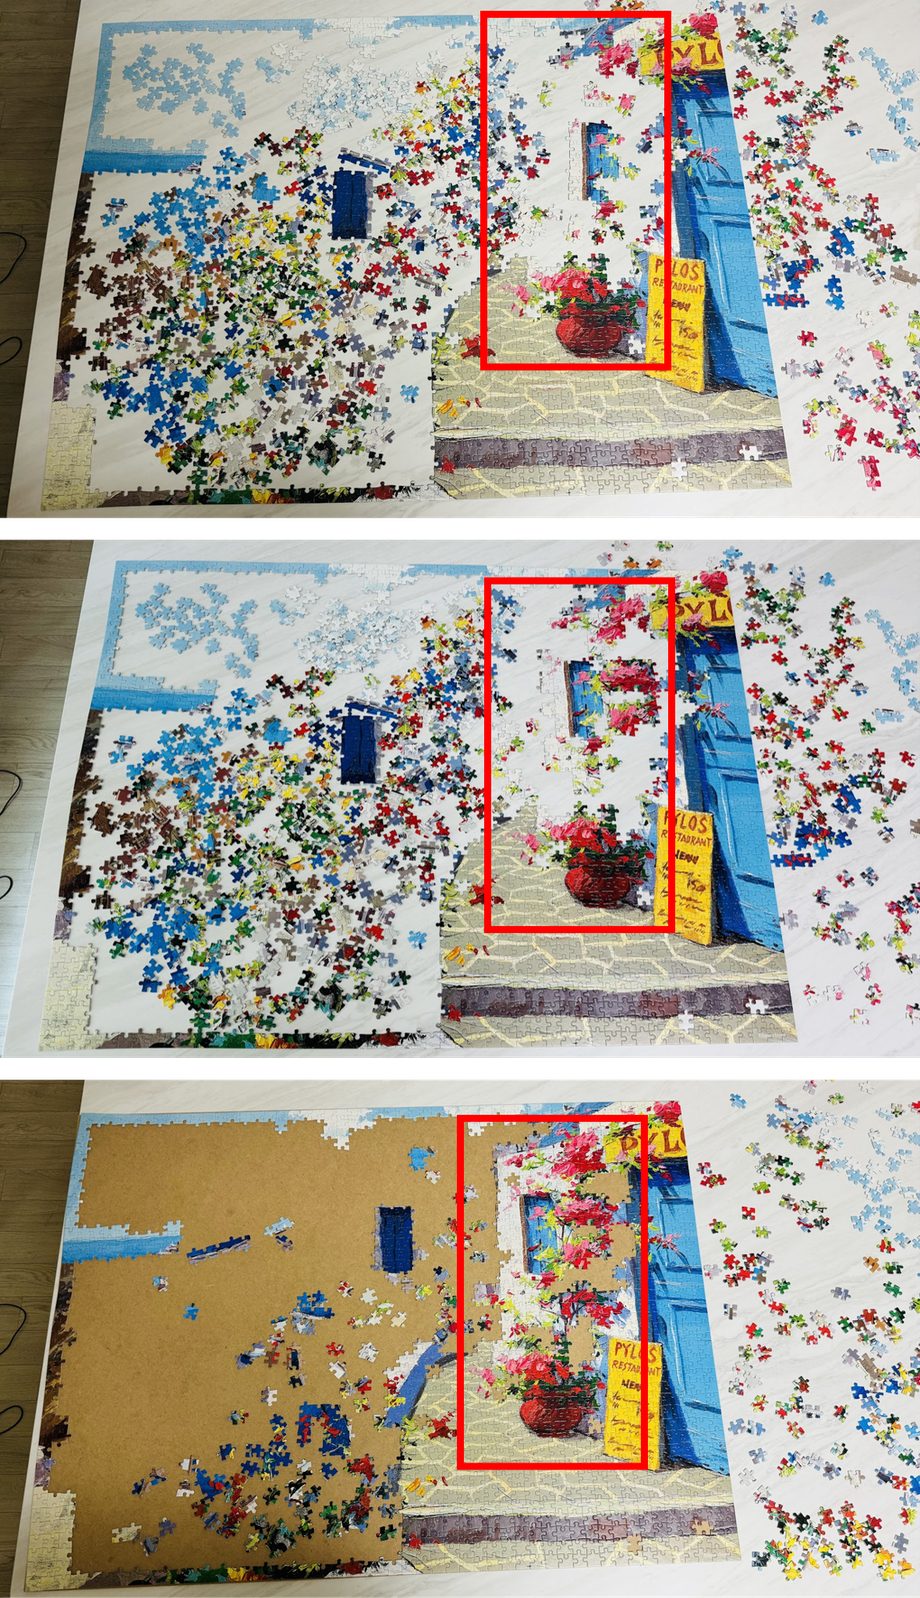 A picture of a jigsaw puzzle being assembled one by one